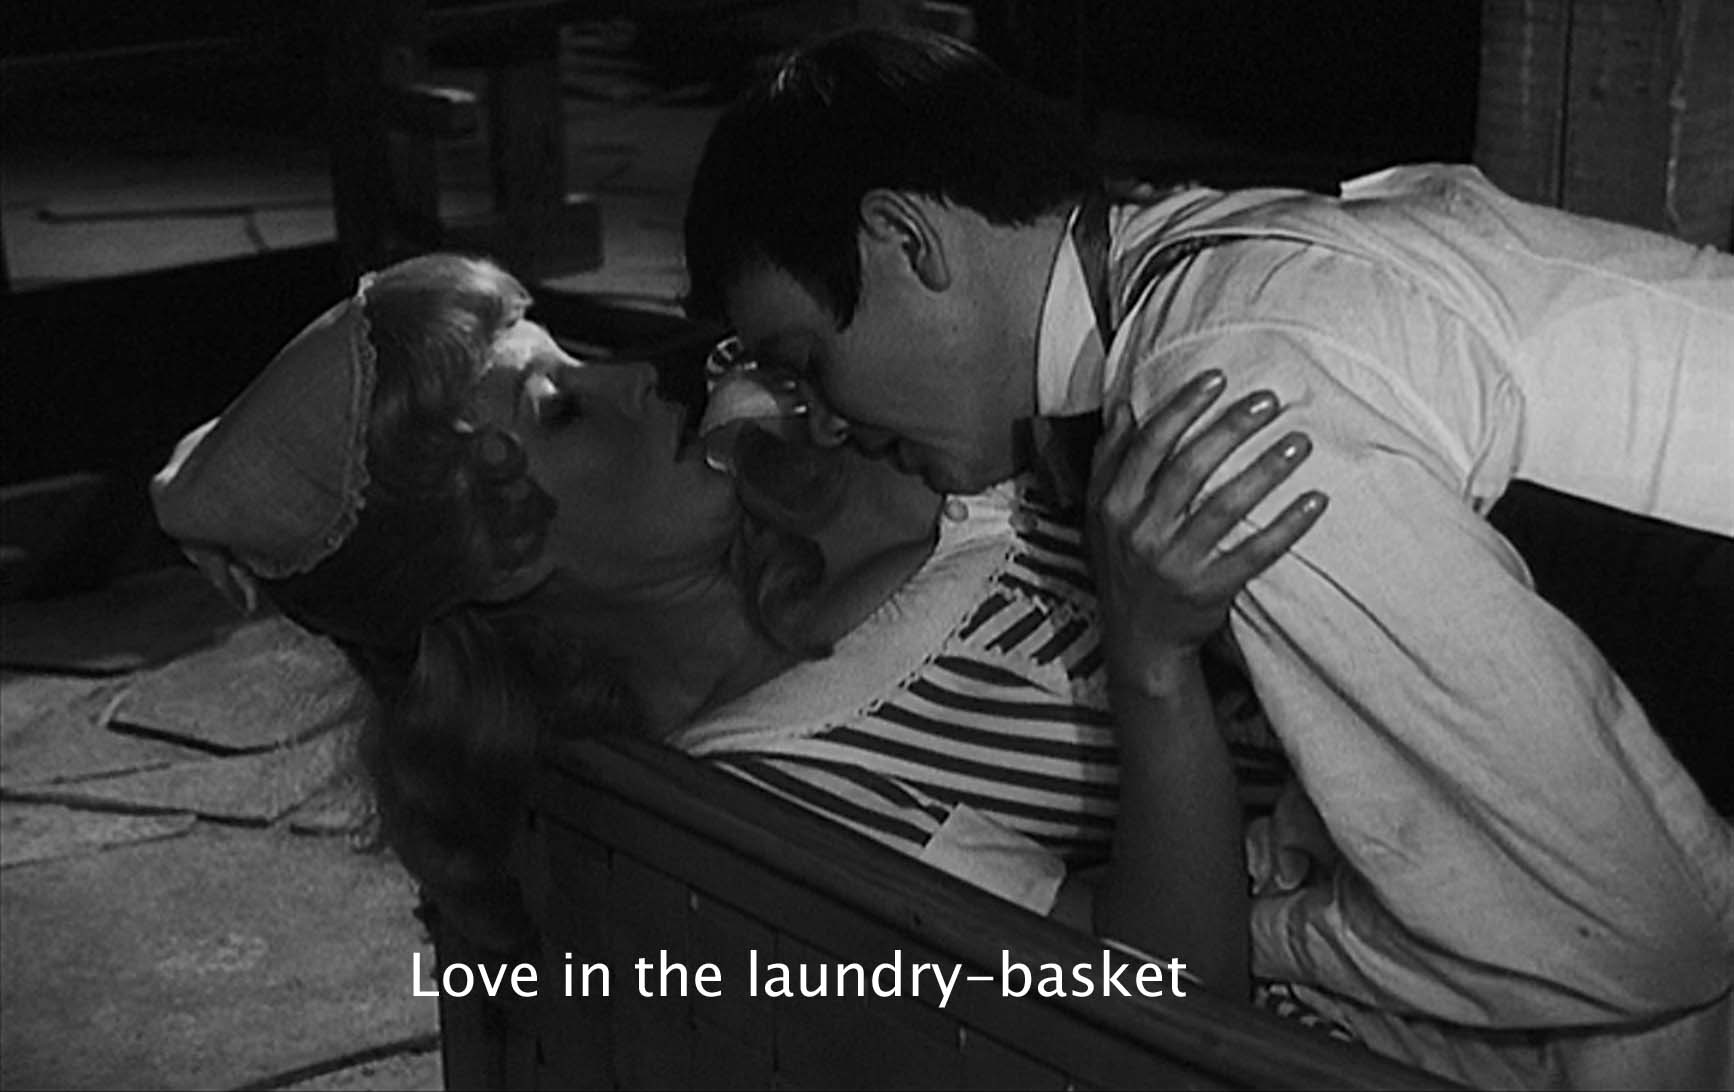 Love in the laundry-basket